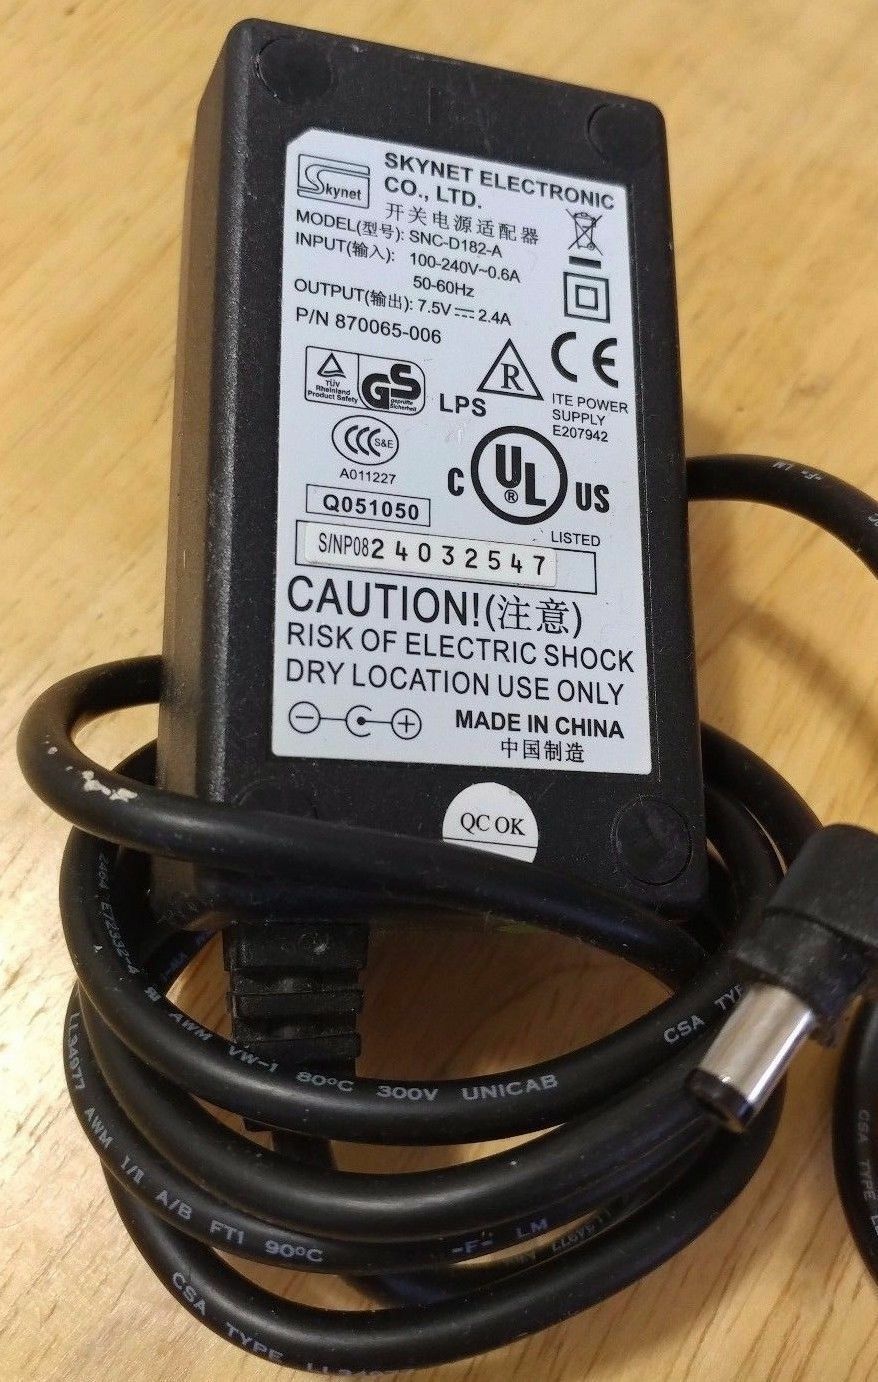 NEW SKYNET ELECTRONIC SNC-D182-A 870065-006 ITE 7.5V 2.4A POWER SUPPLY AC ADAPTER